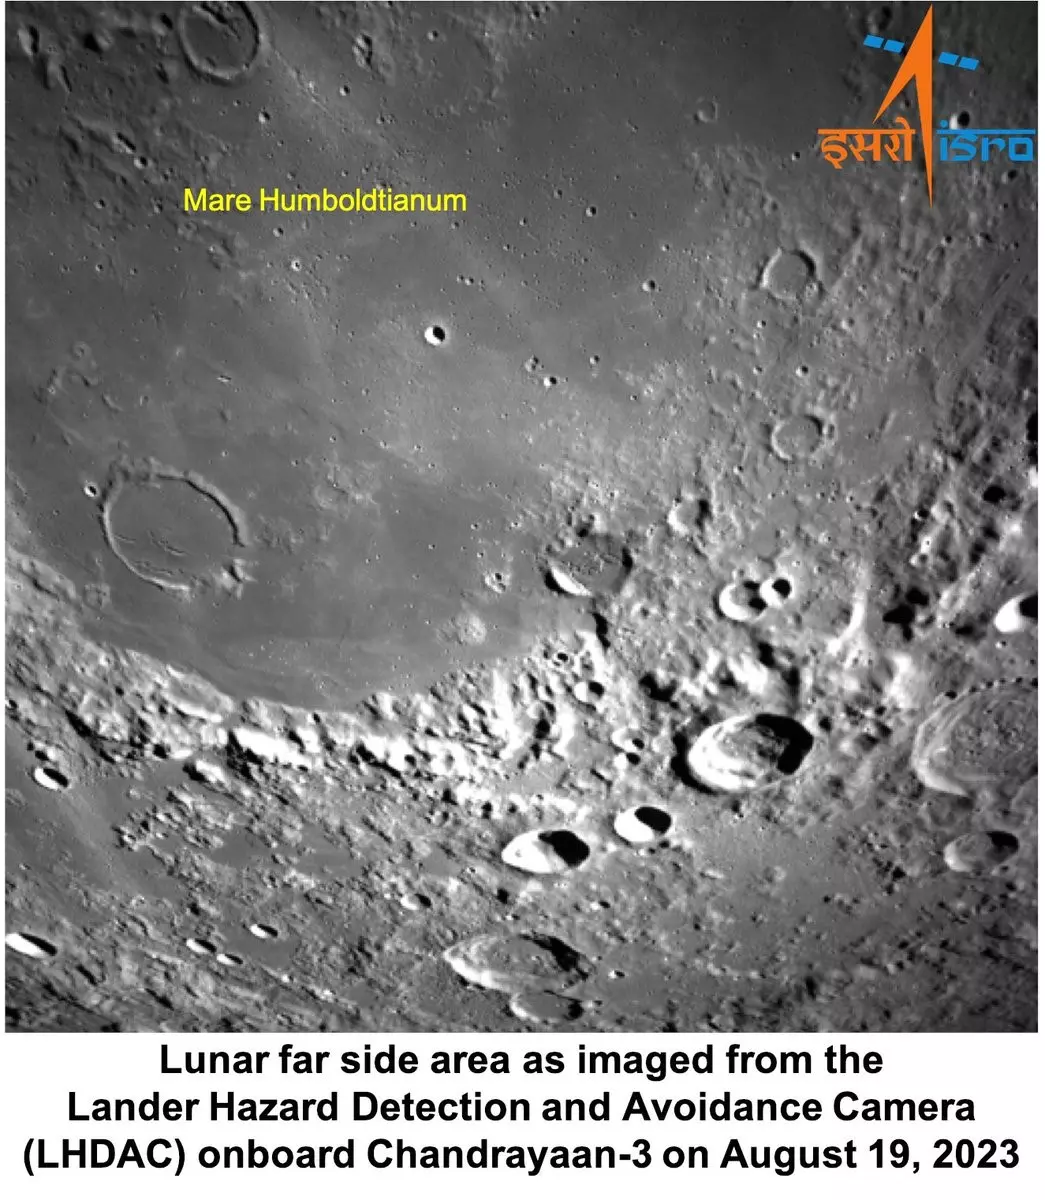 Chandrayaan-3 releases images of Lunar far side area ahead of landing